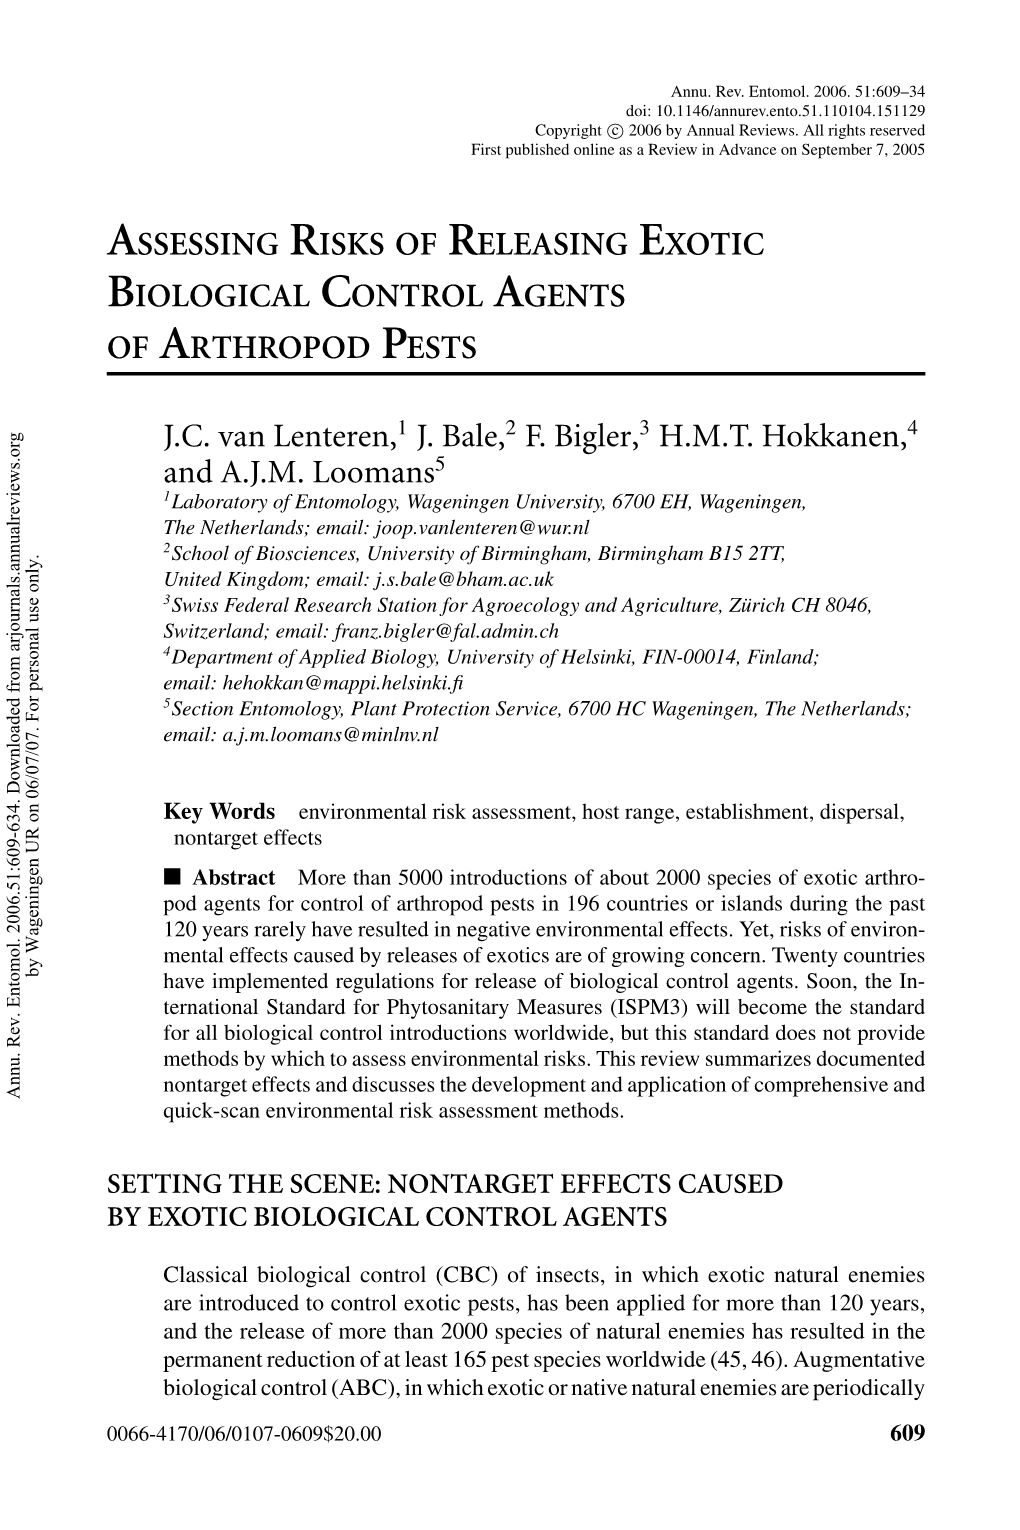 Assessing Risks of Releasing Exotic Biological Control Agents of Arthropod Pests